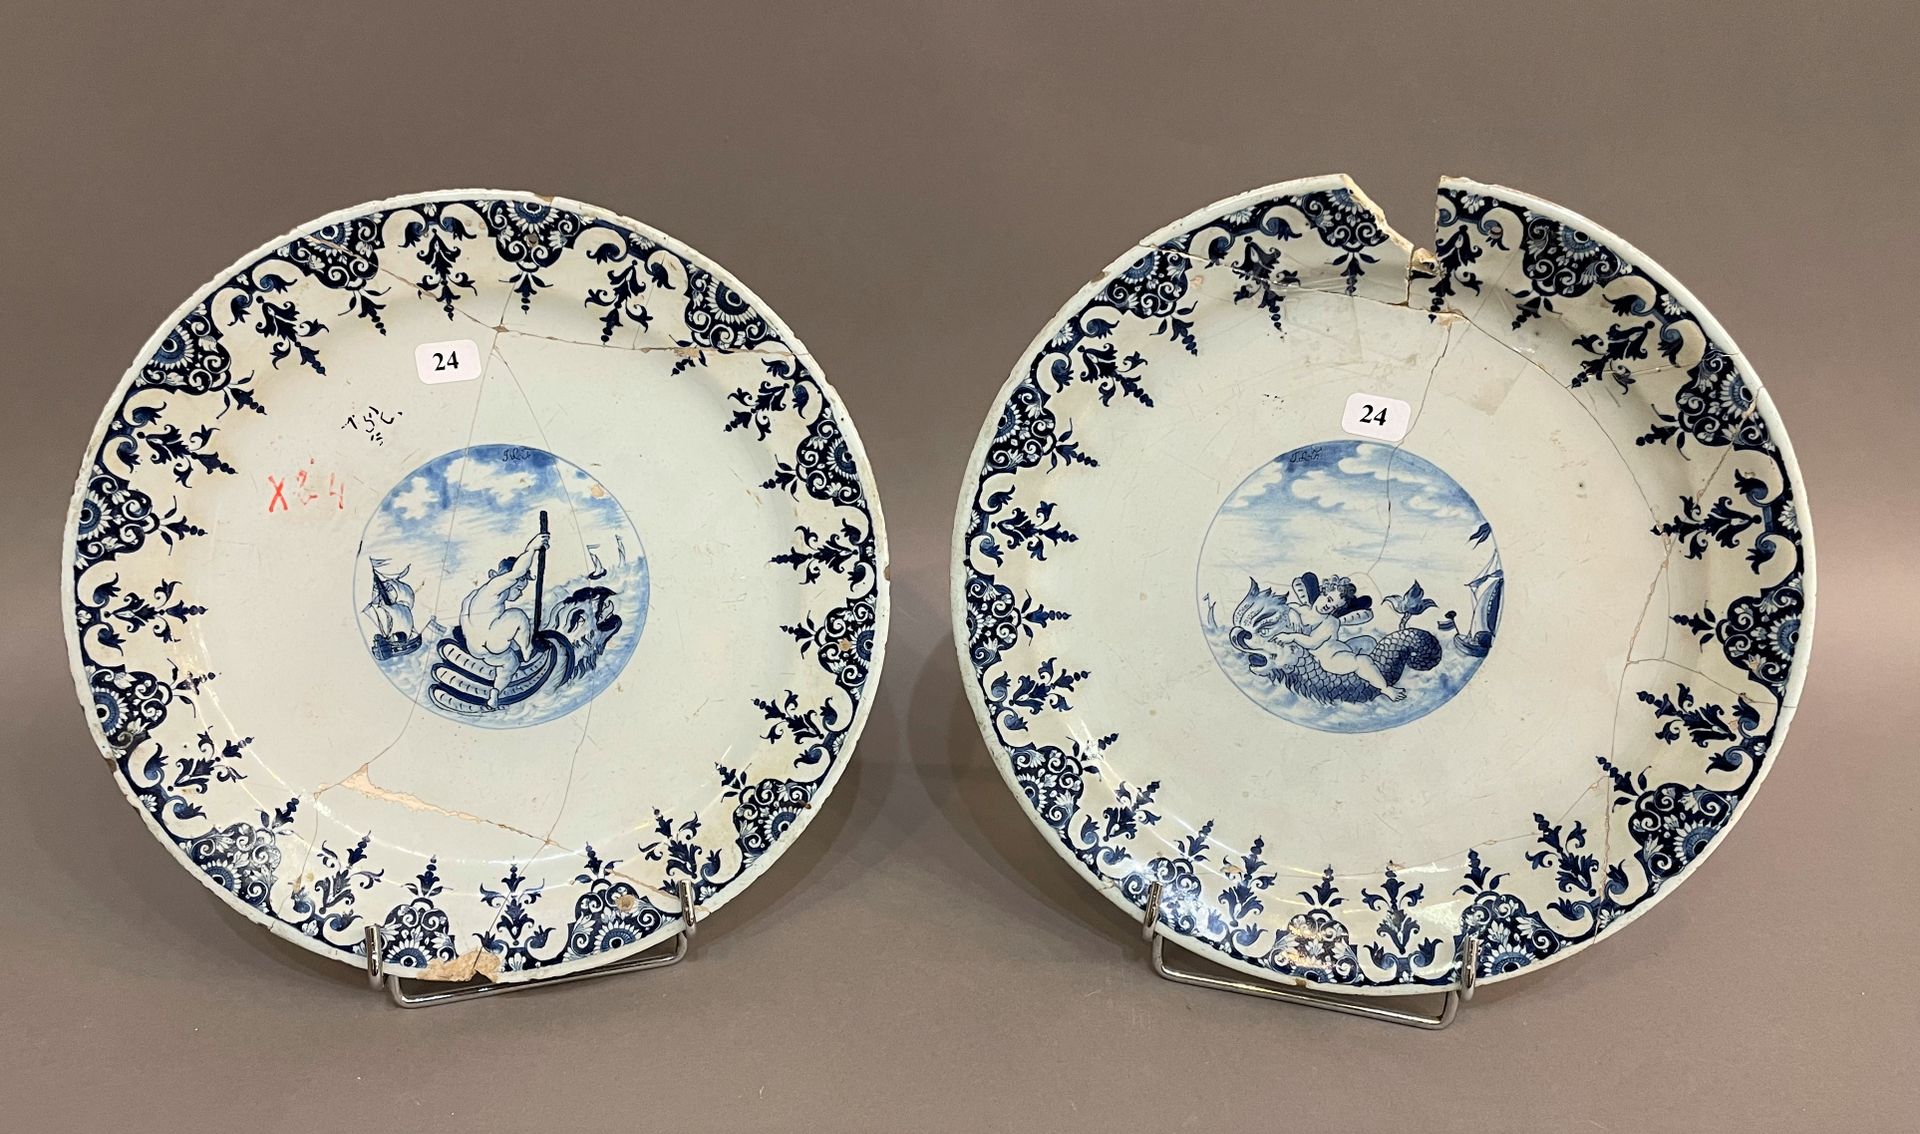 Null Rouen

2 earthenware plates decorated in blue monochrome in the center of a&hellip;